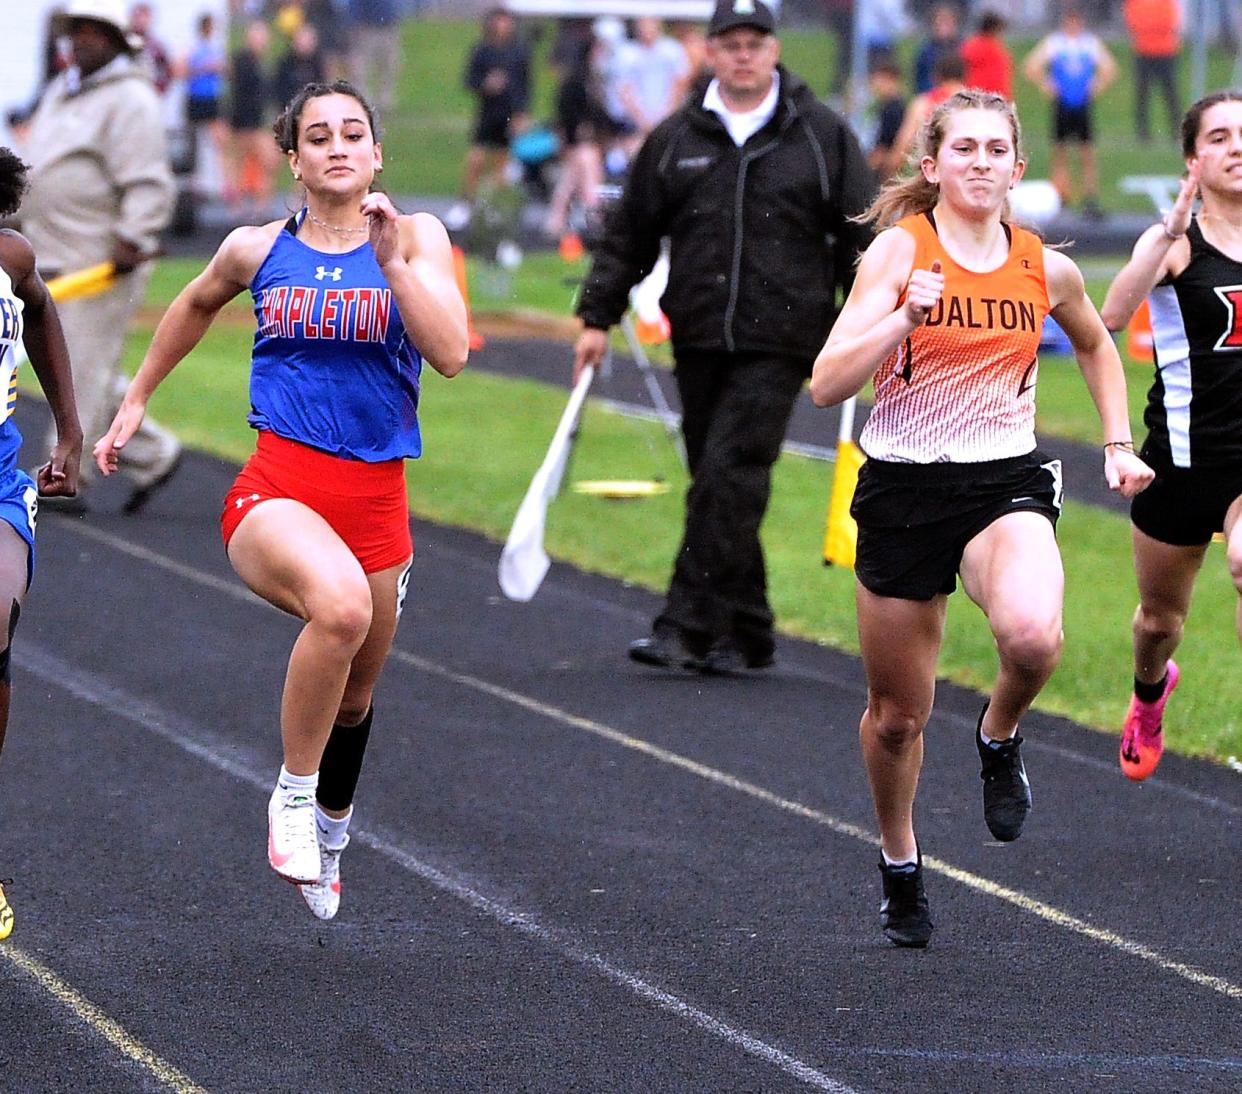 Mapleton's Jillian Carrick competes in the girls 100 meters at the Division III Perry Regional on Friday.